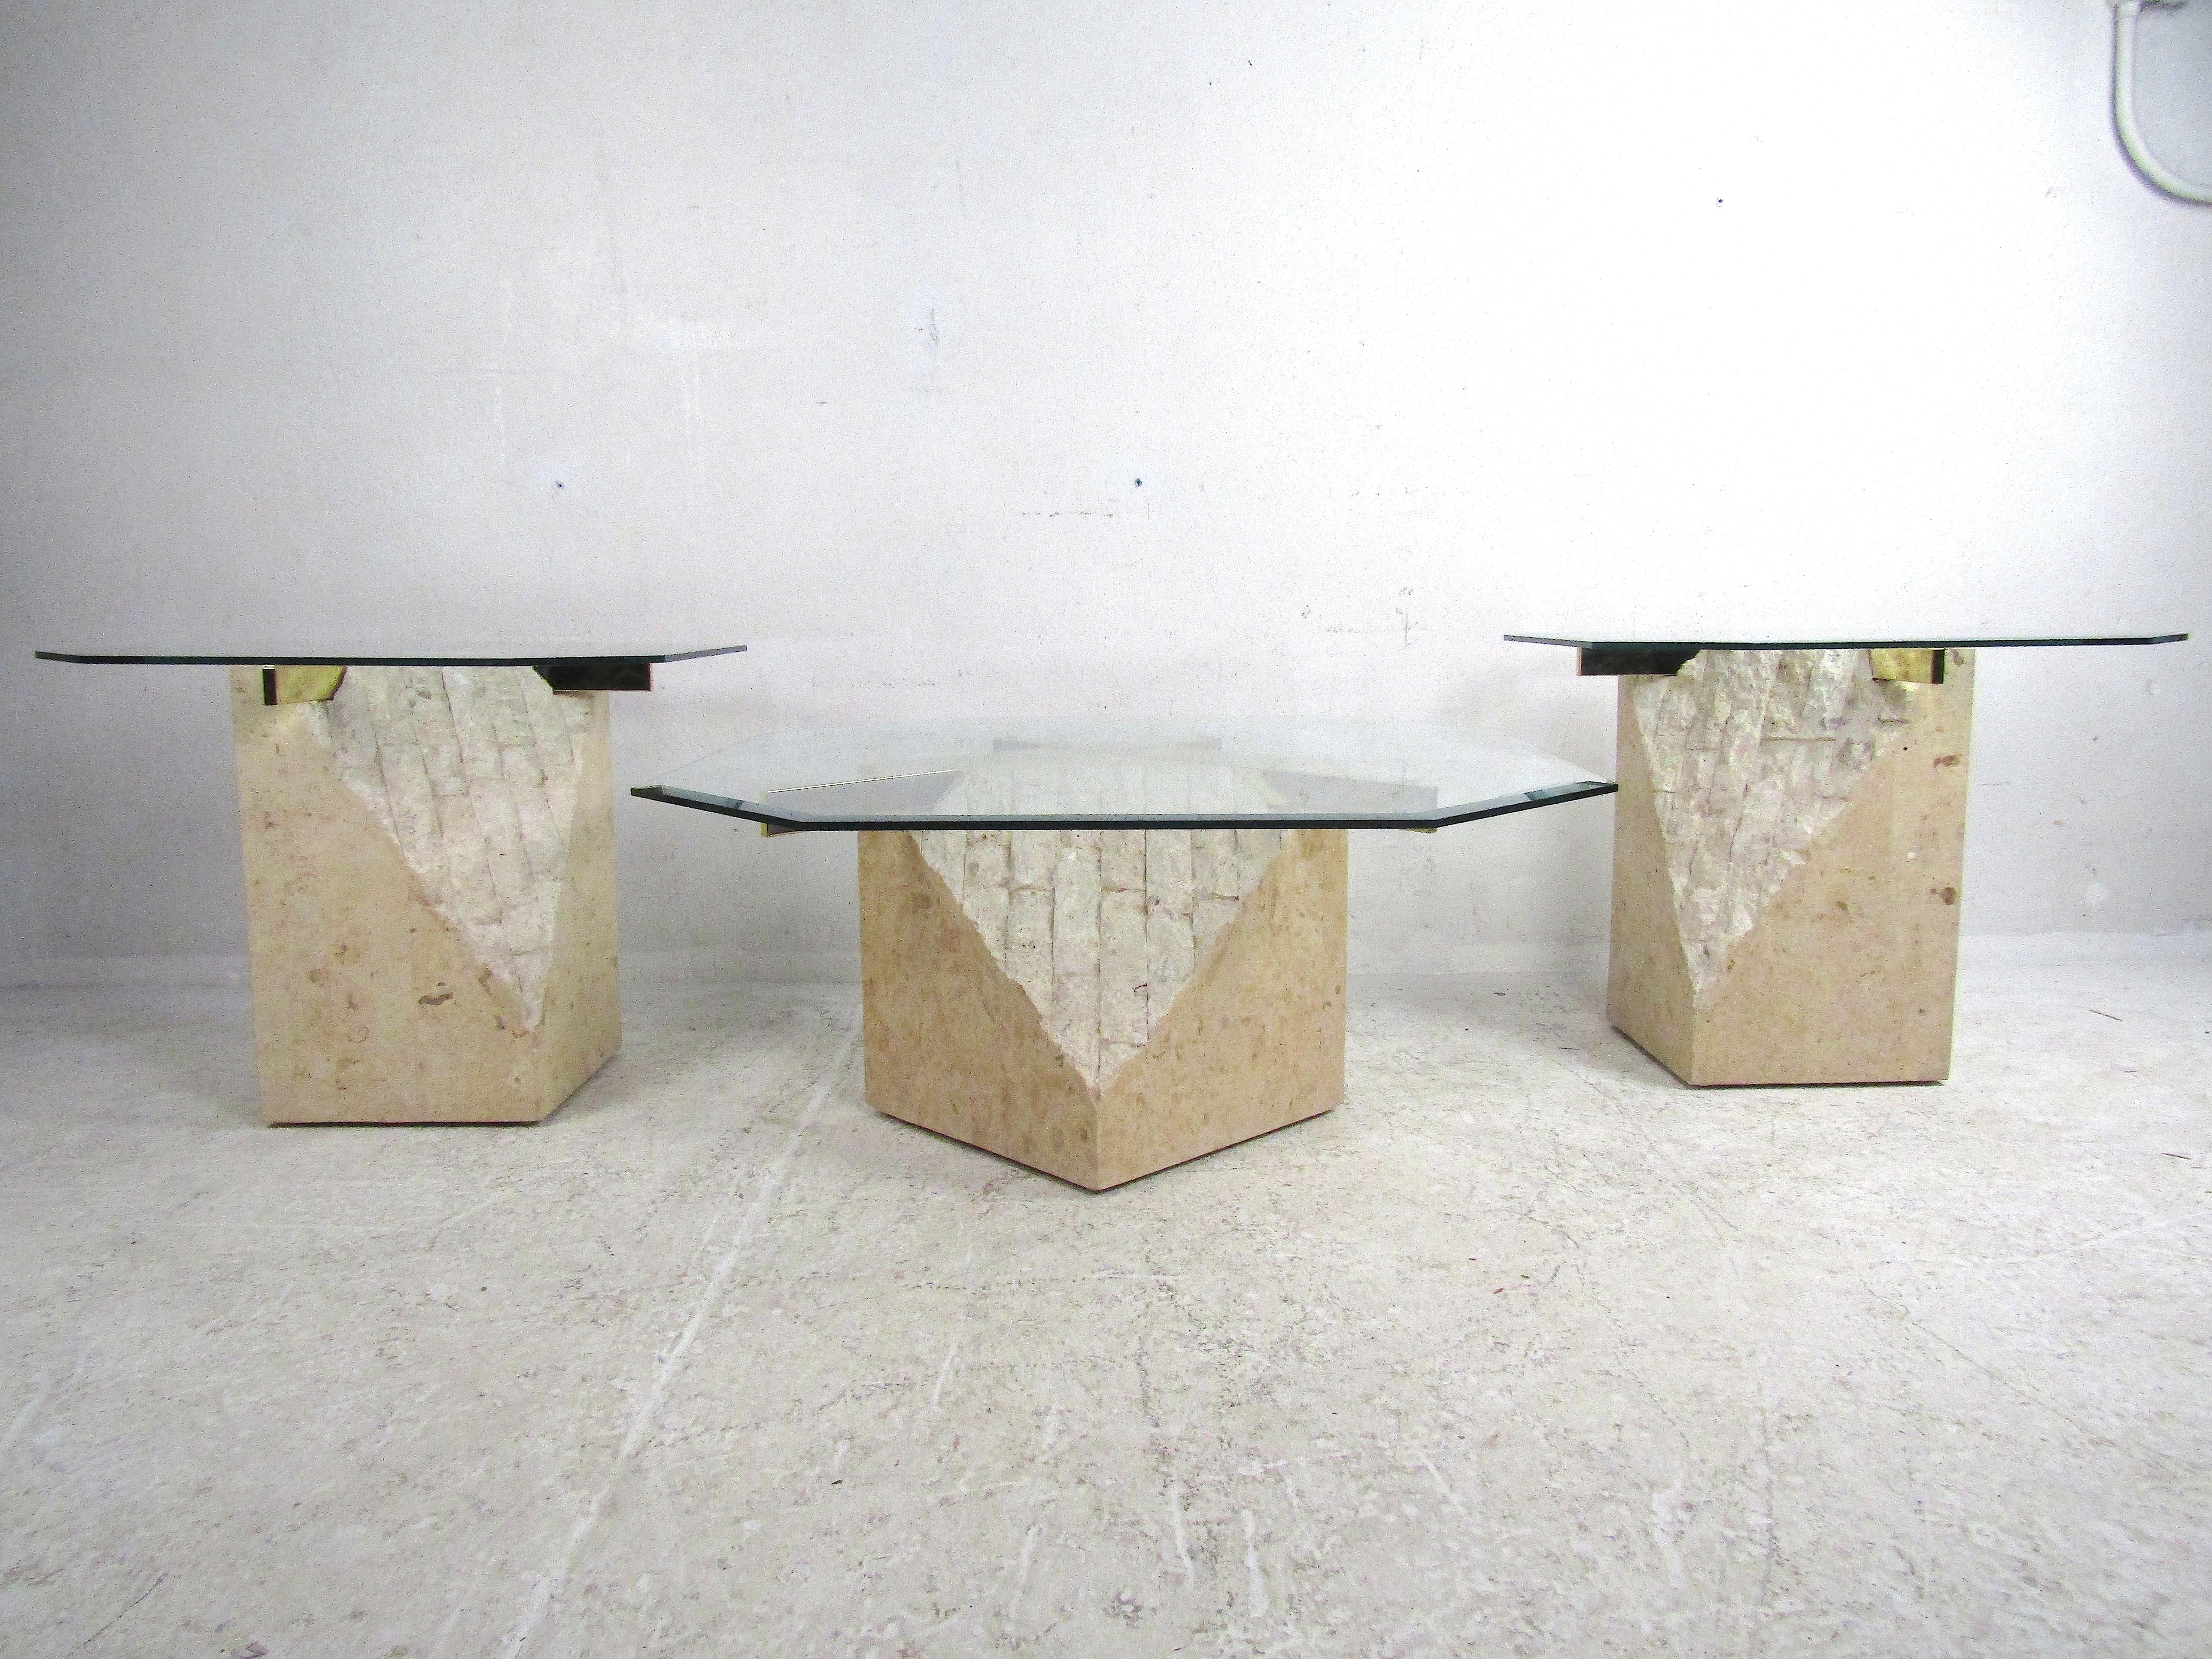 Stunning set of 3 midcentury Artedi style coffee and side tables. Faux-stone bases with brass cross-sections support 1/4 inch glass tabletops with beveled edges. Great set of tables sure to liven up any modern interior. Please confirm item location